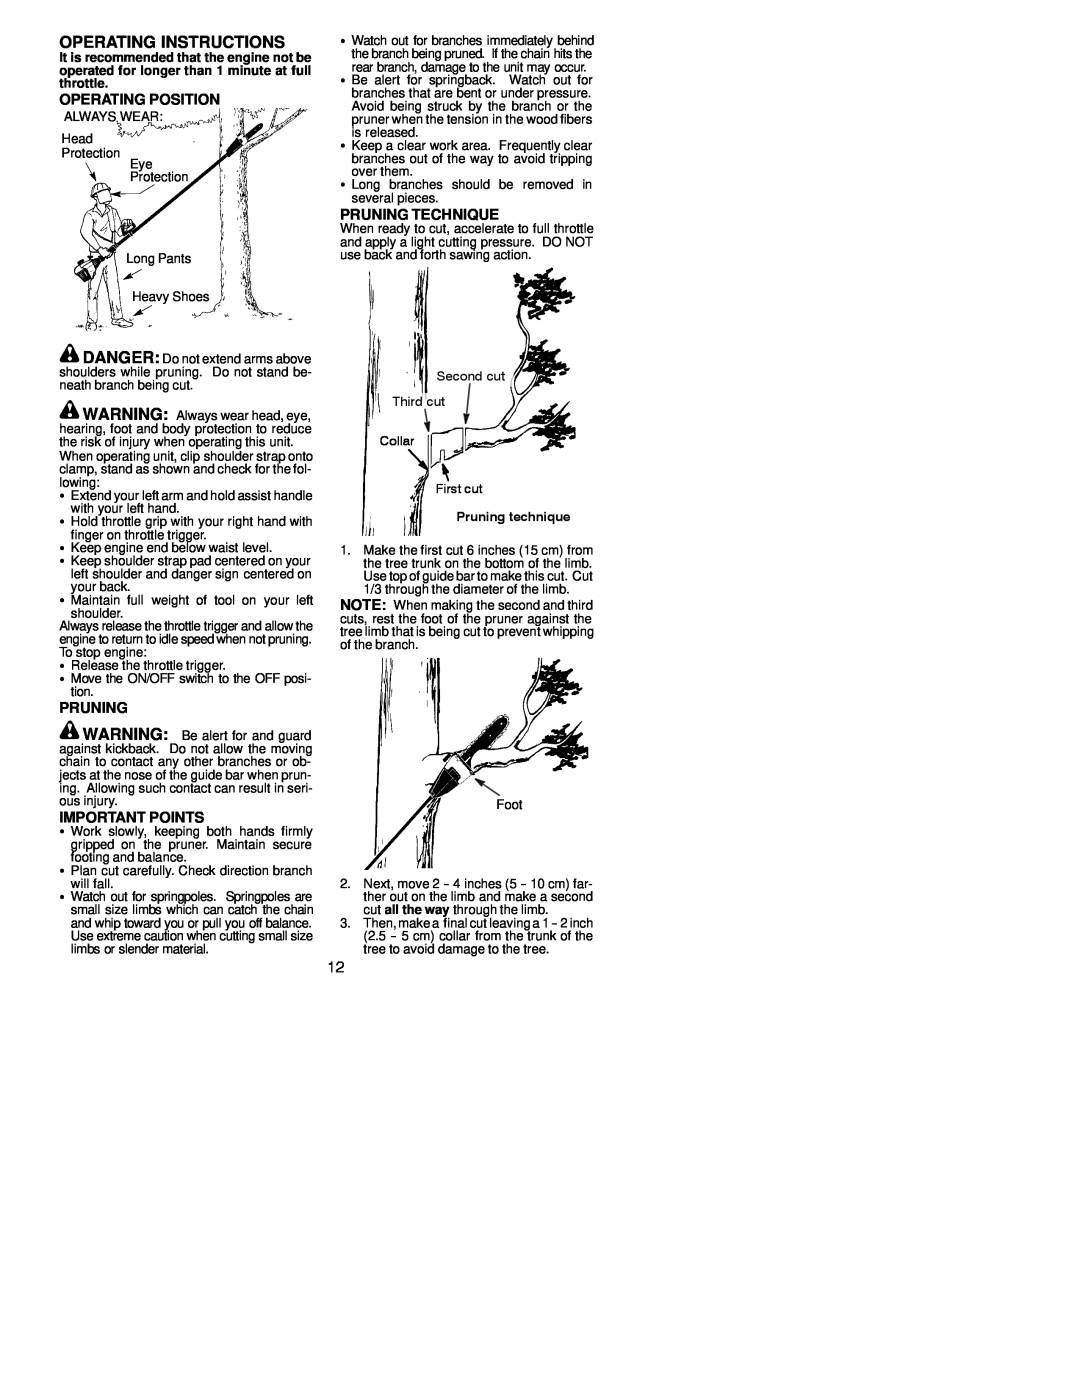 Poulan 530164083 Operating Instructions, Operating Position, Important Points, Pruning Technique, Pruning technique 